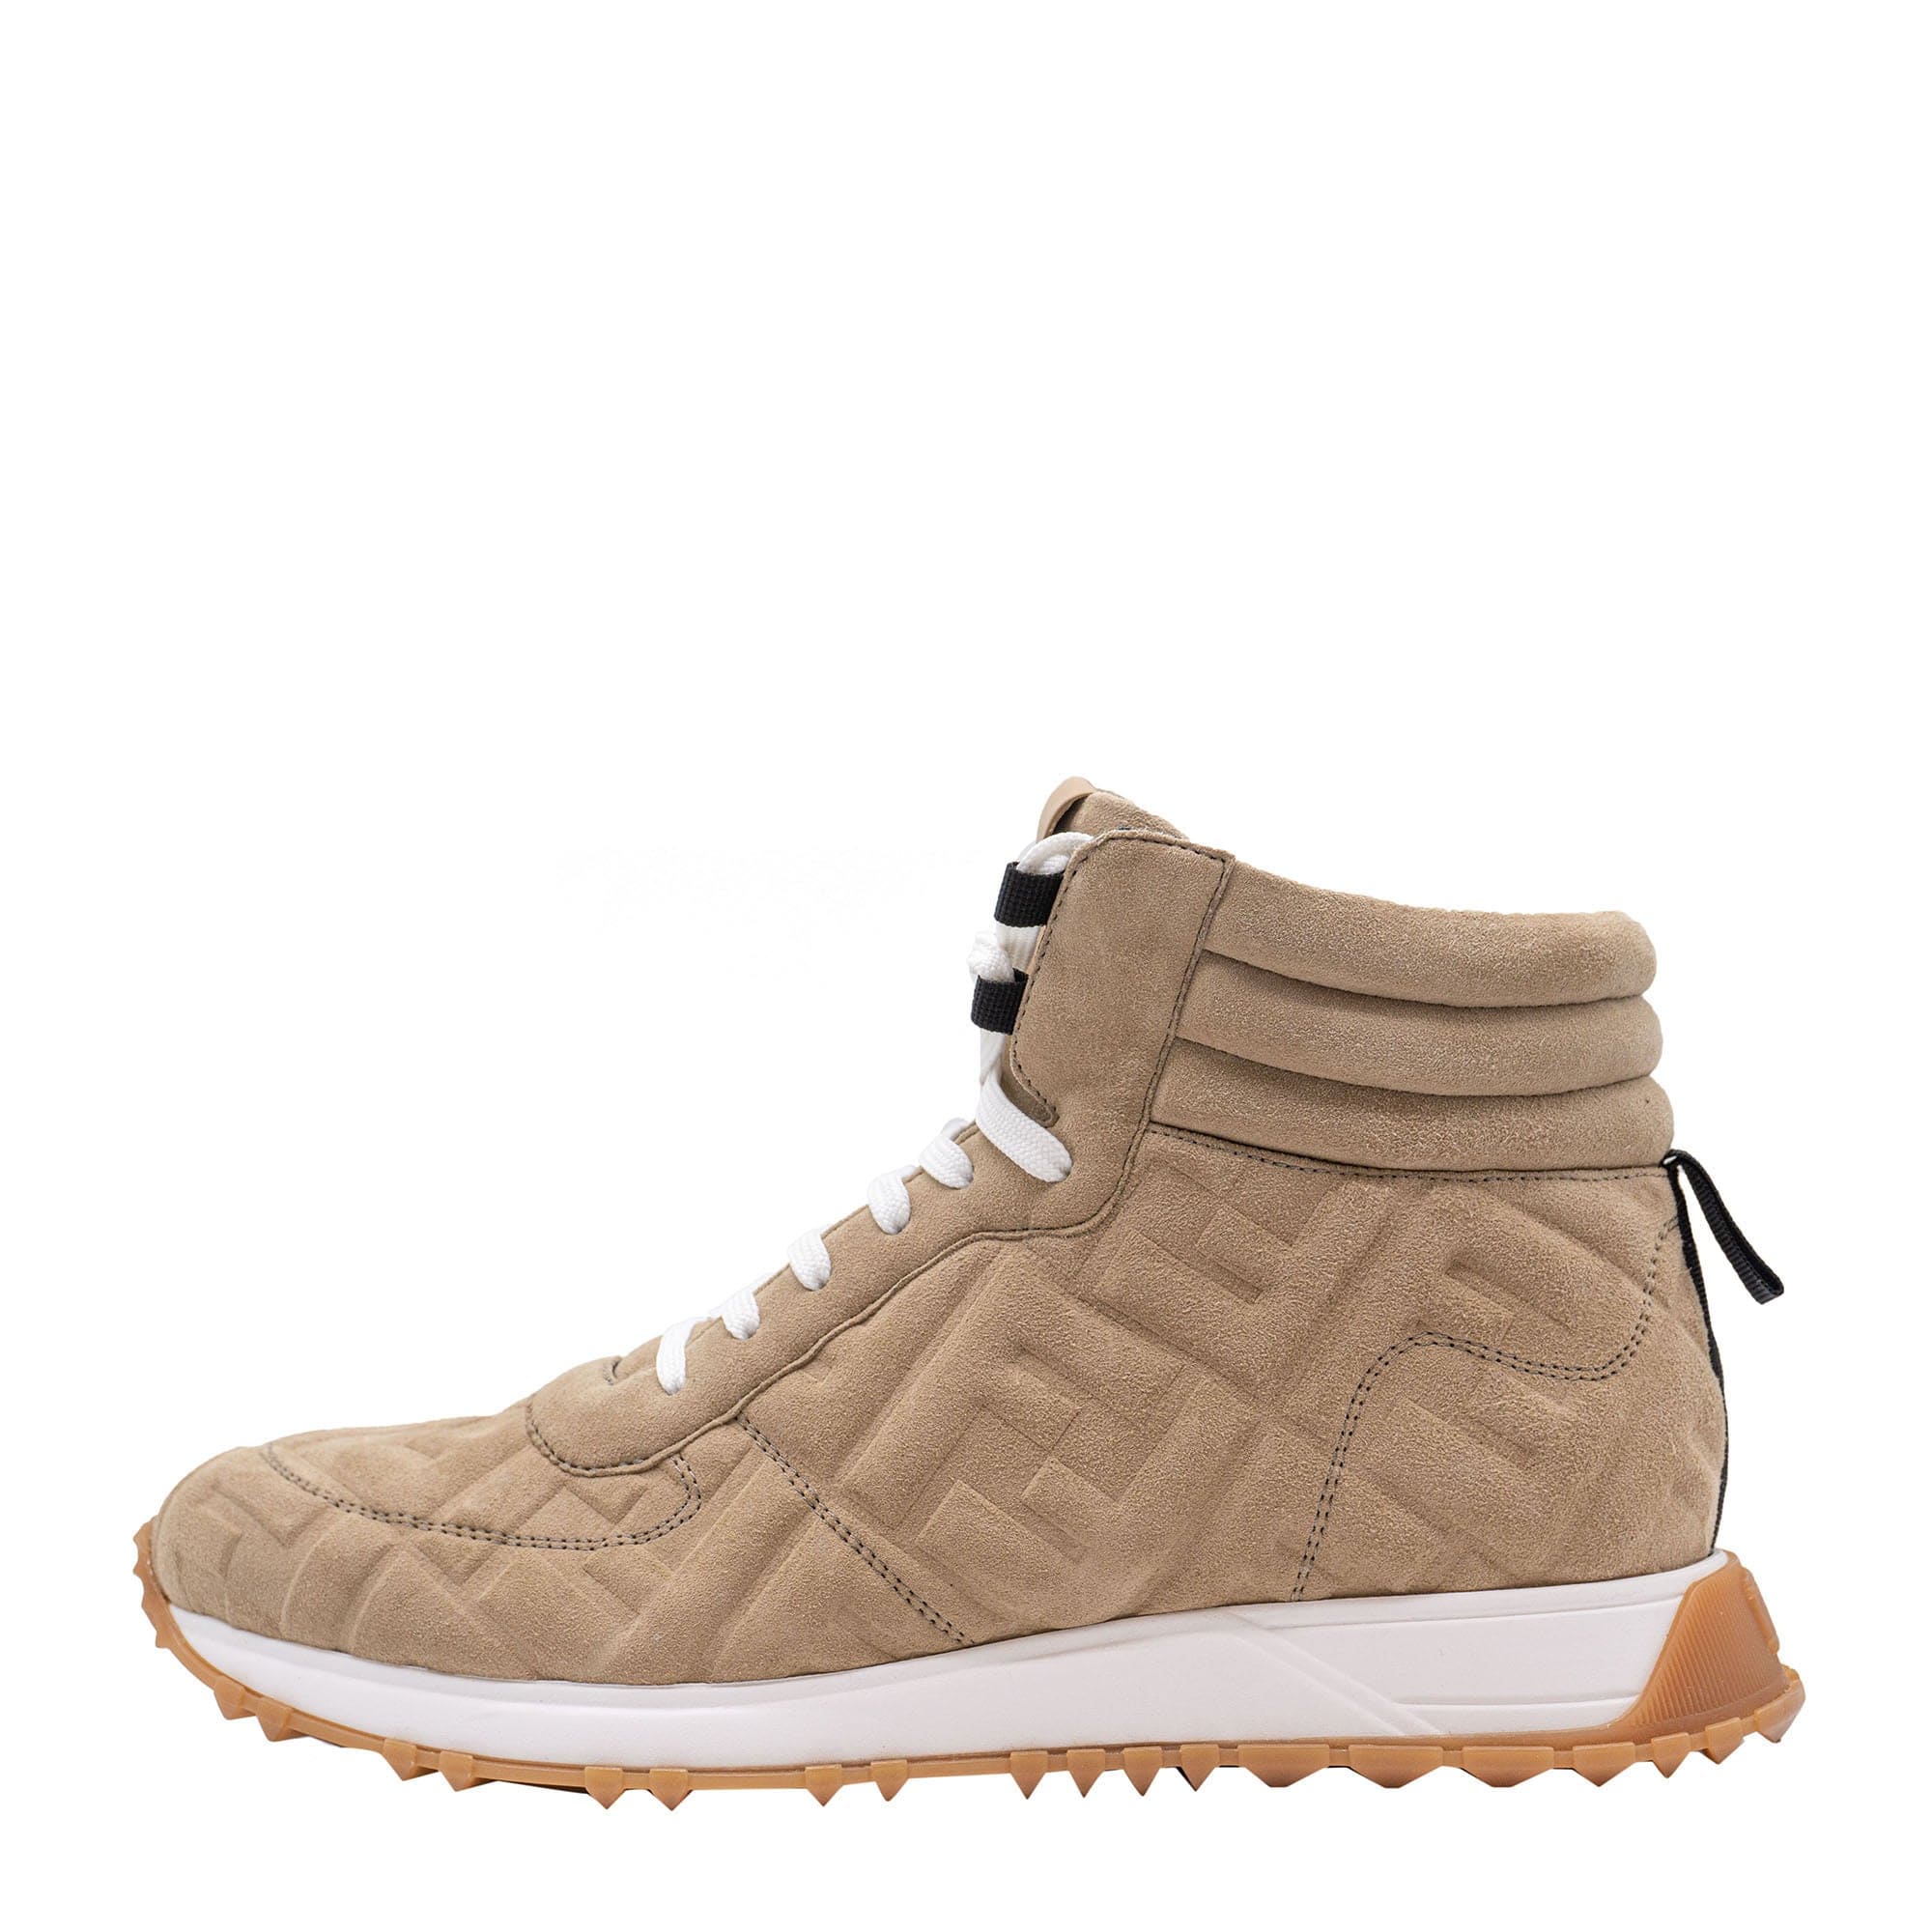 Fendi Fendi Suede FF Logo Leather High-Top Sneakers 7 SYCH055